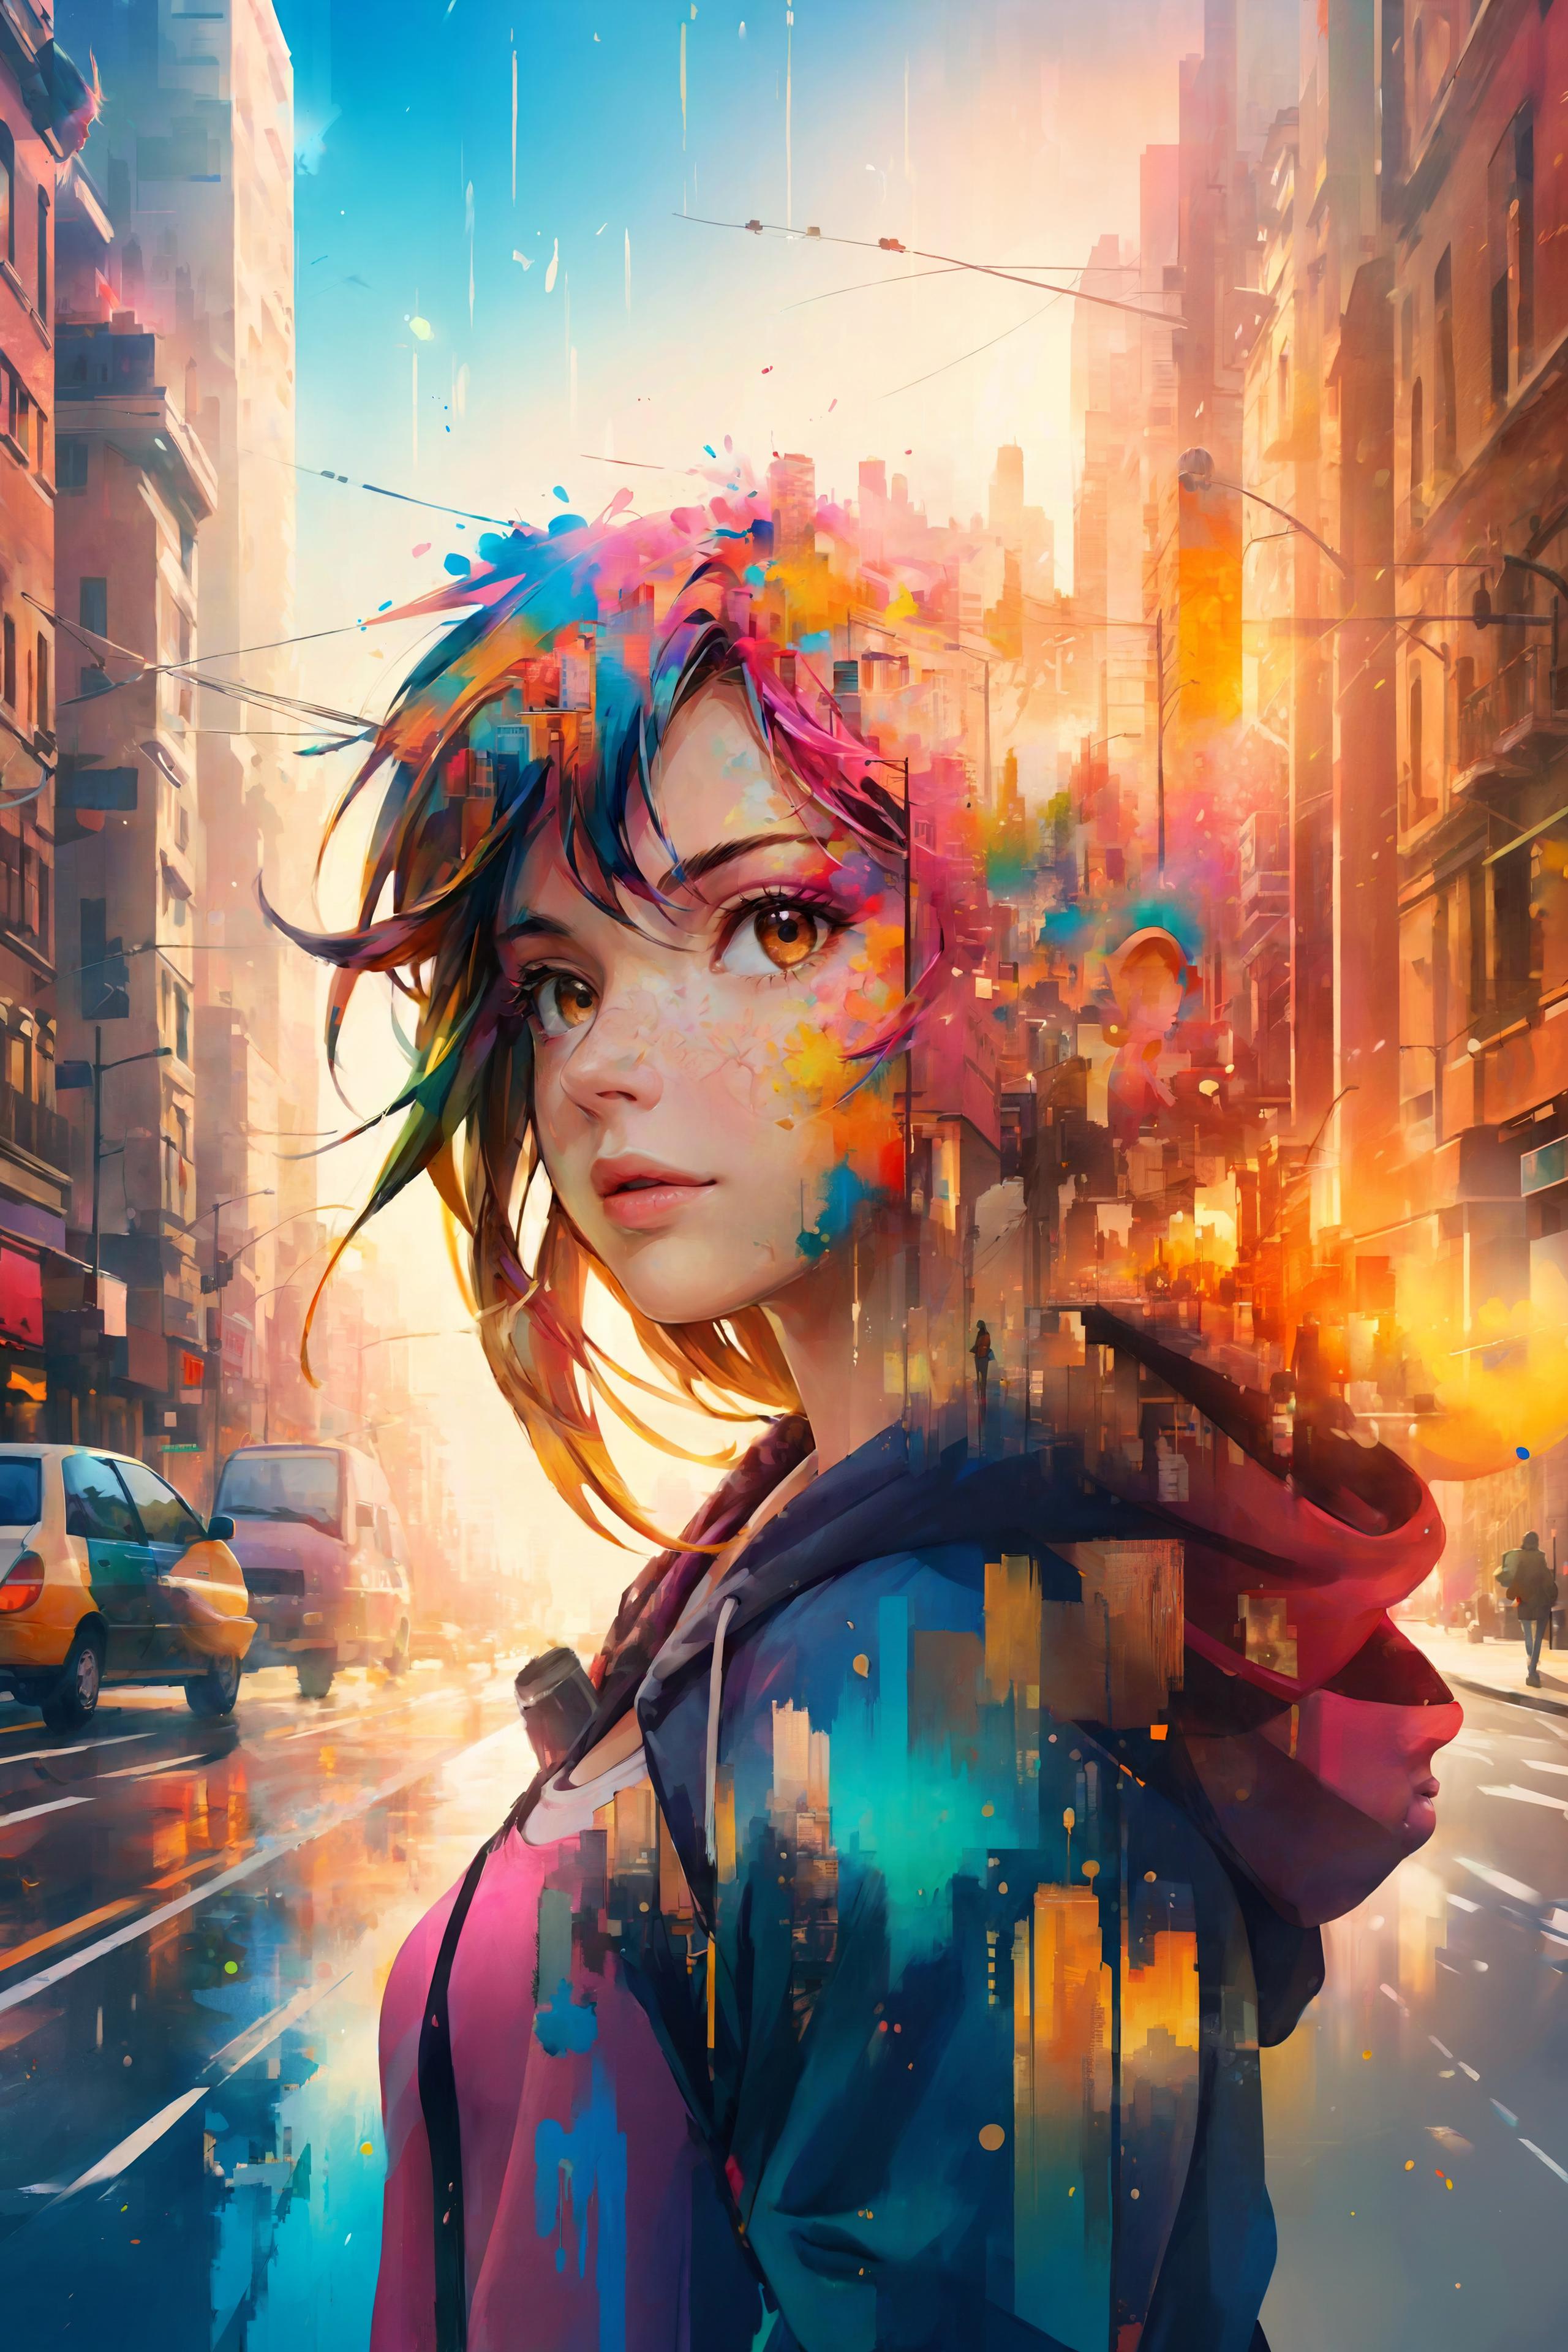 Colorful Artistic Portrait of a Woman with a Hoodie in a Cityscape